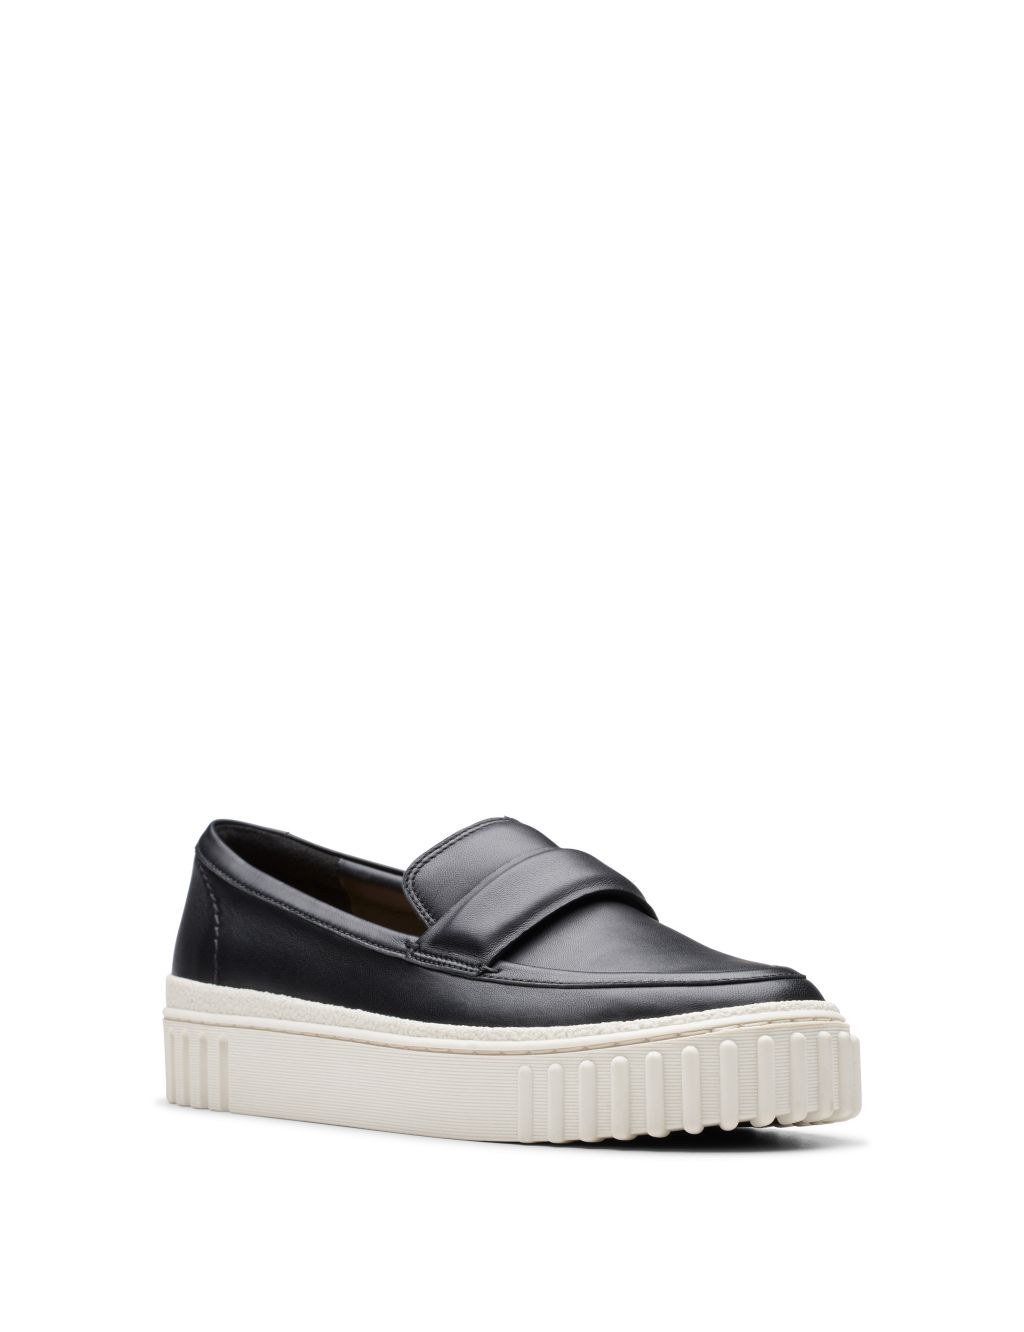 Leather Flatform Loafers 2 of 6